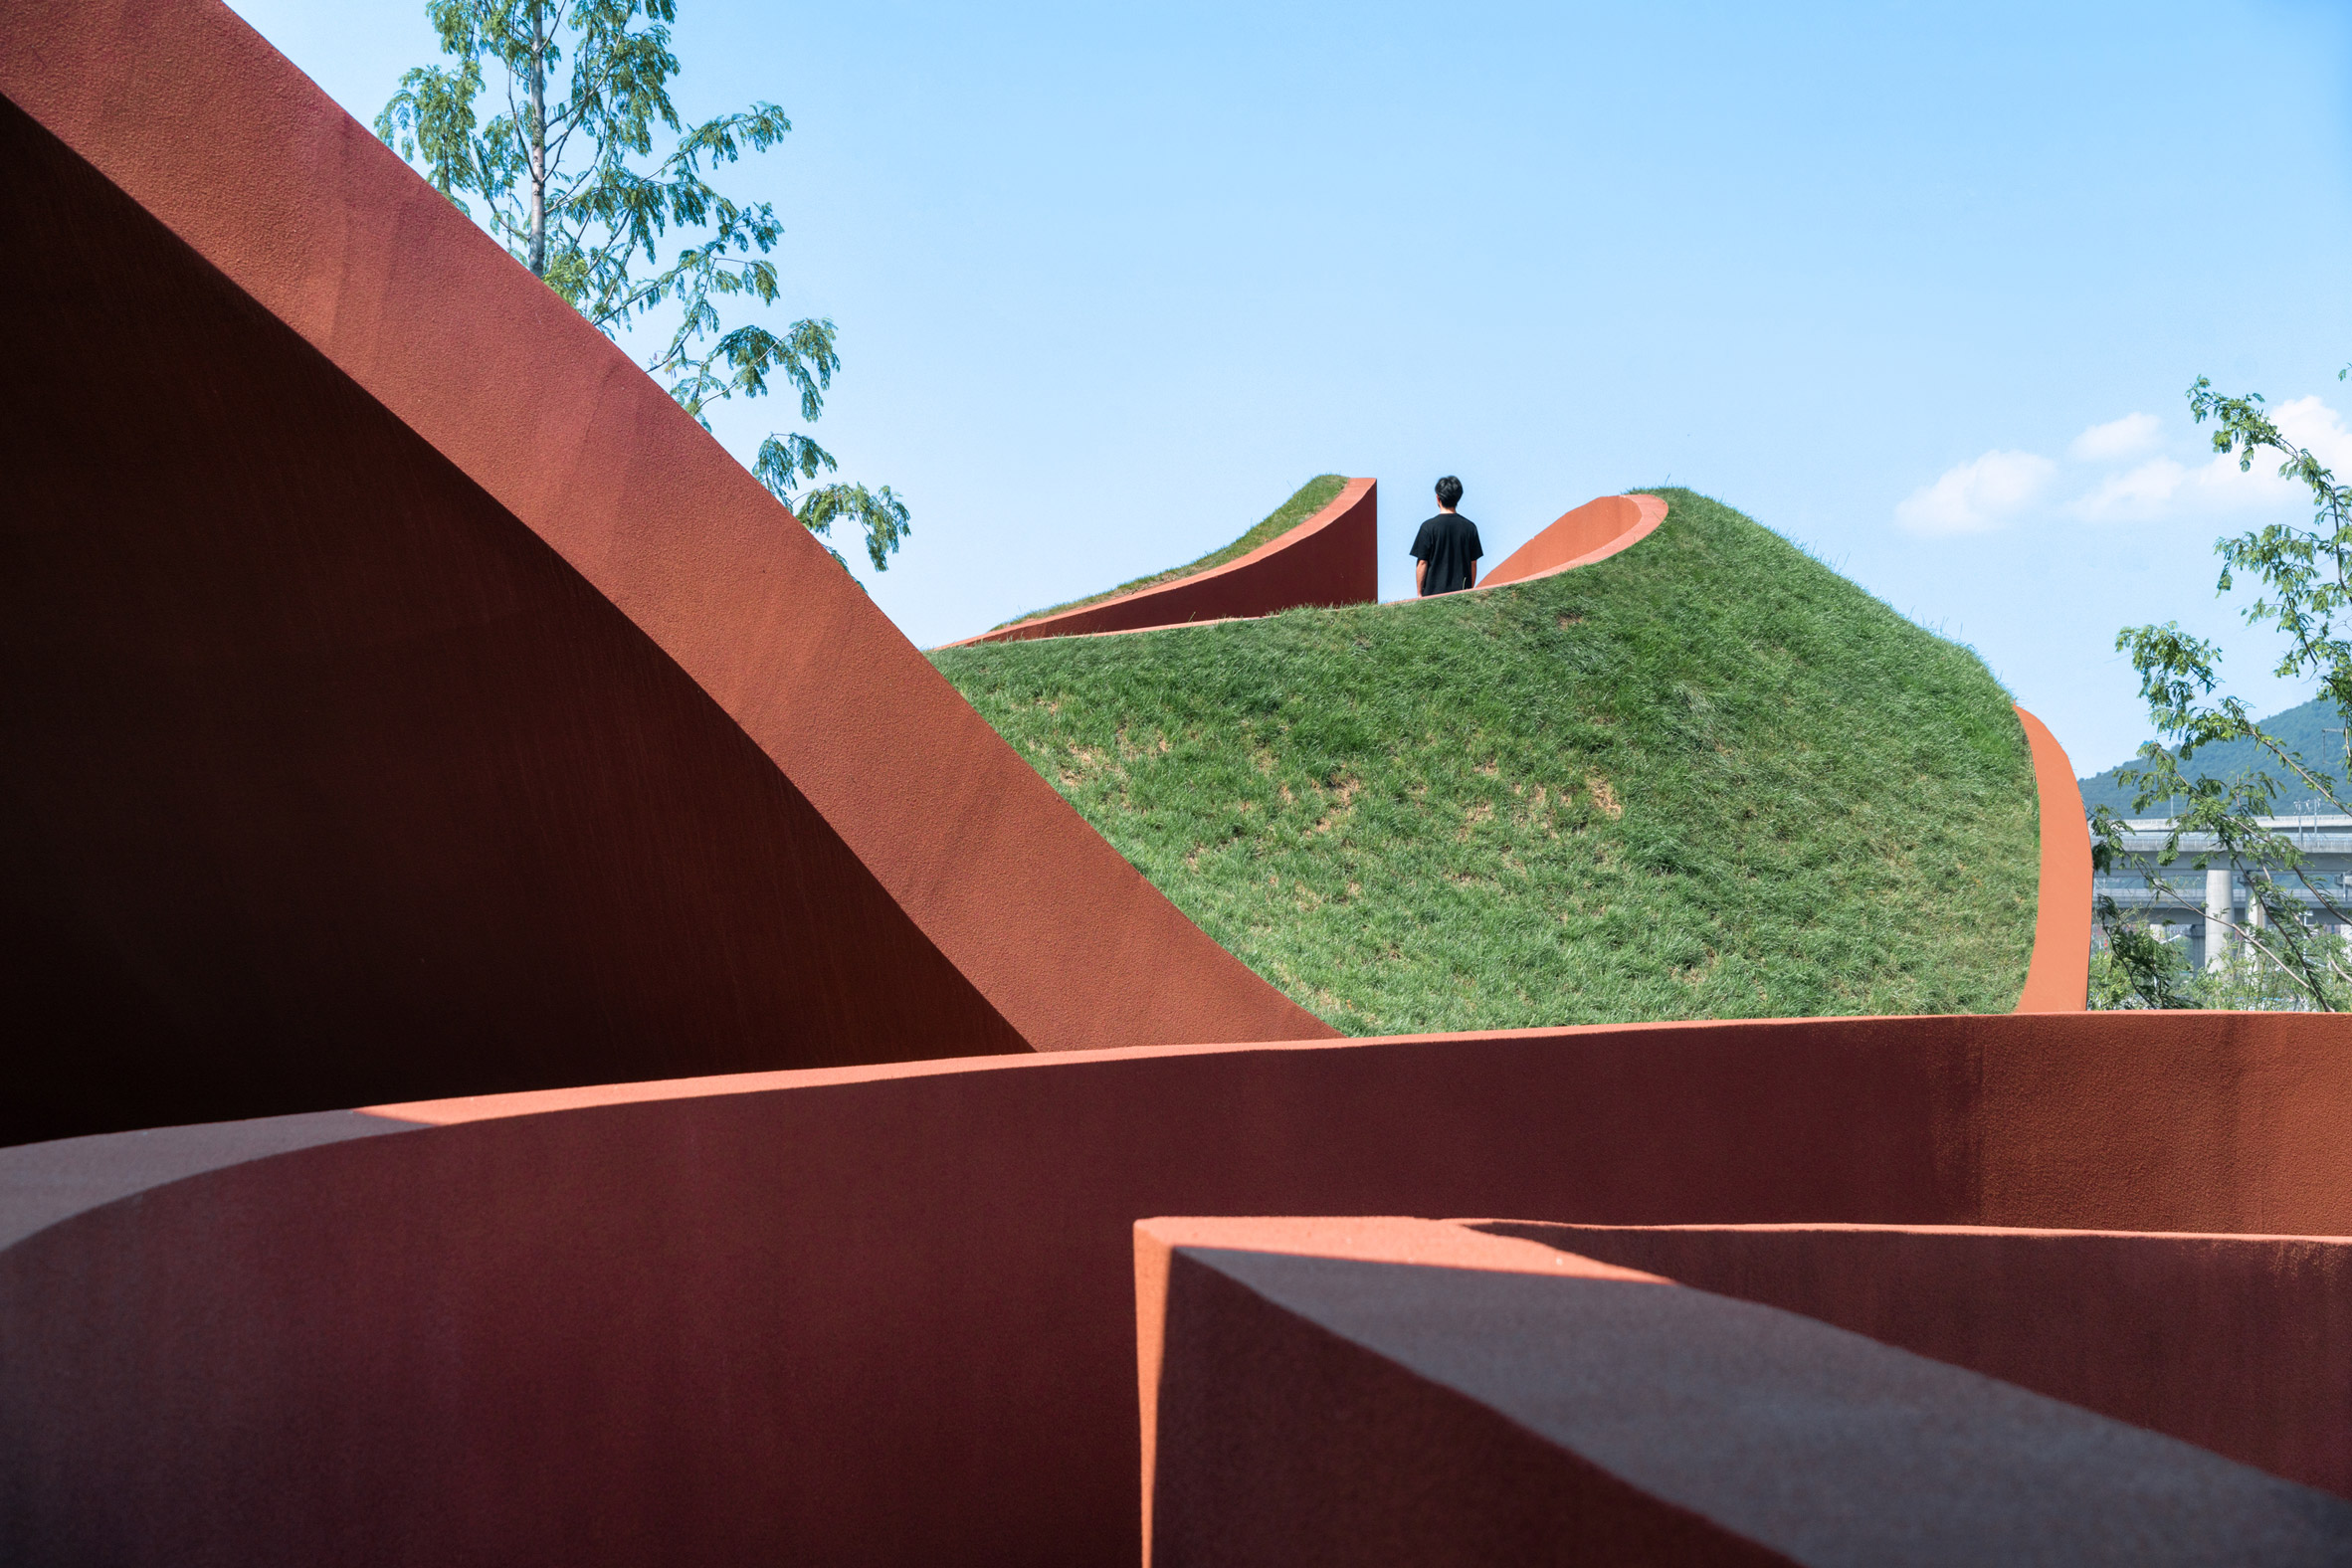 Red-concrete walkways in Chinese cultural centre